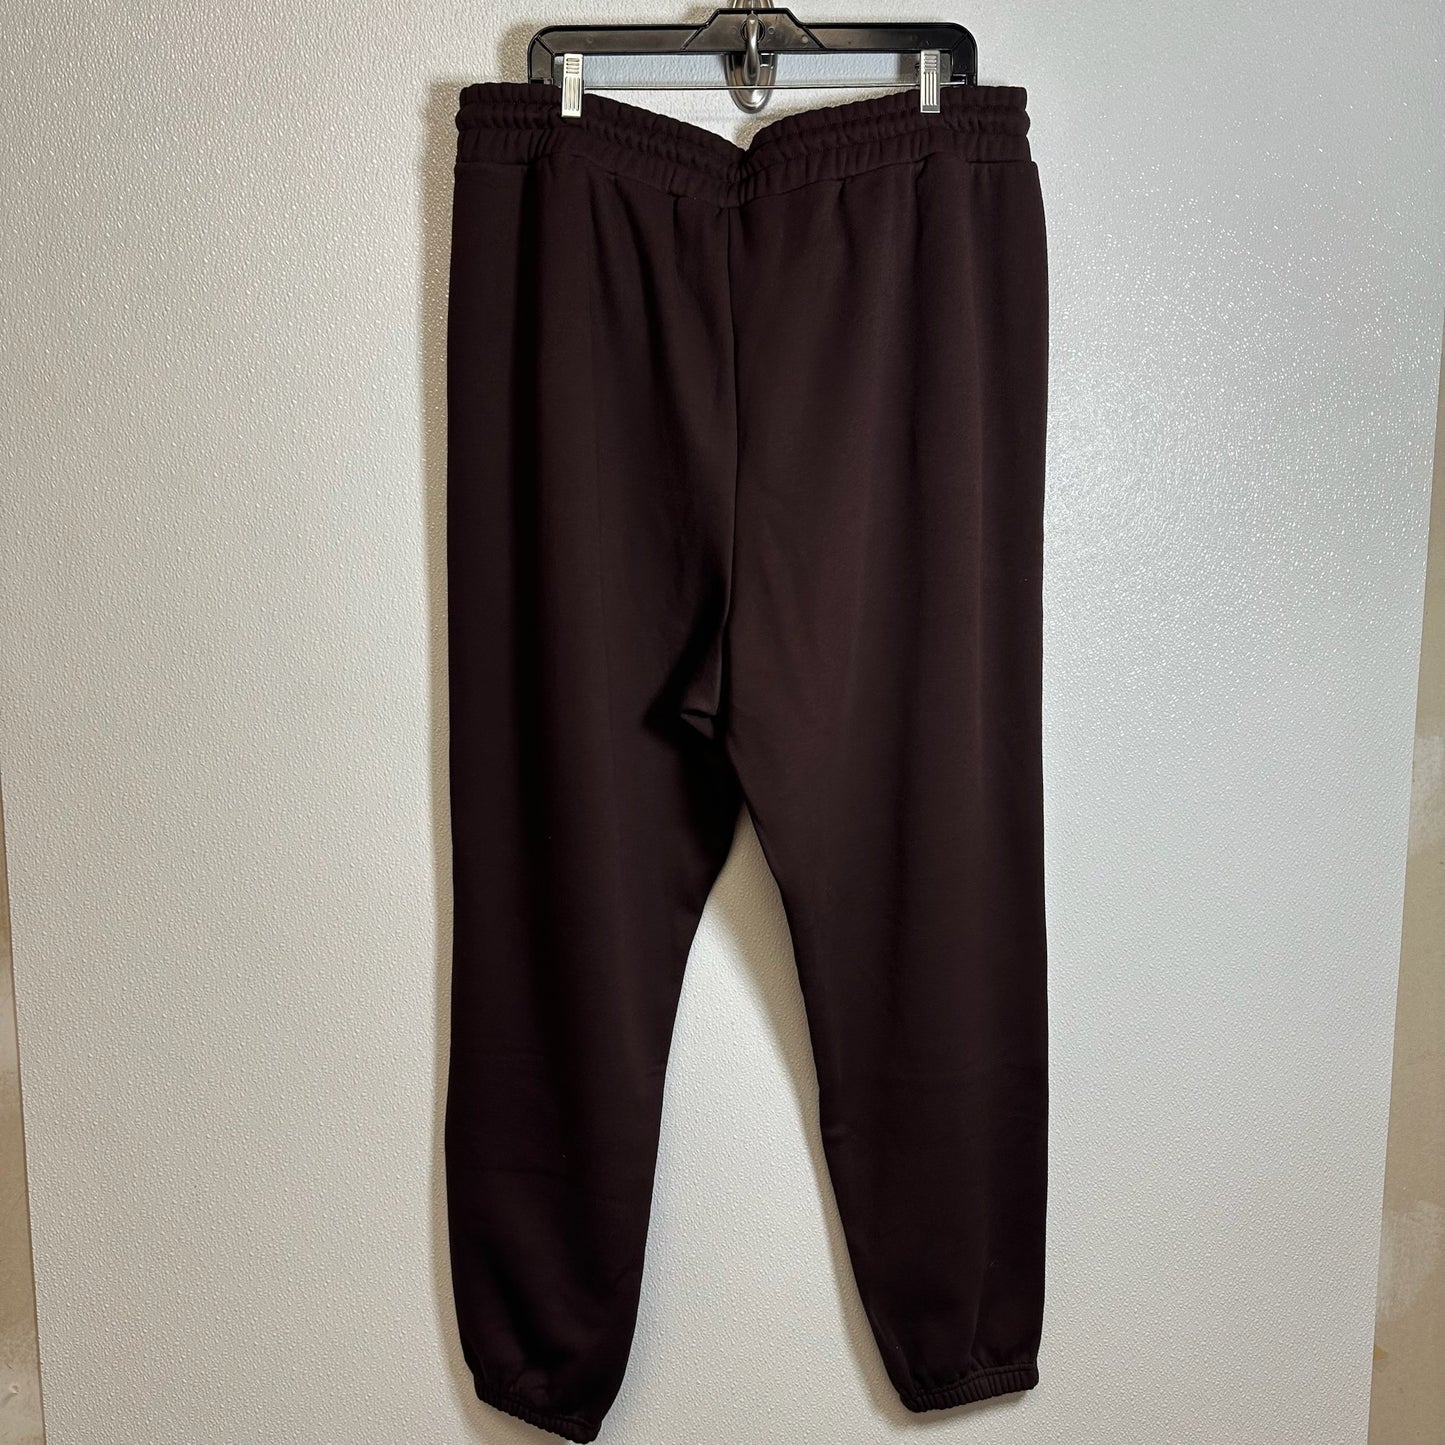 Pants Joggers By Fabletics  Size: 1x